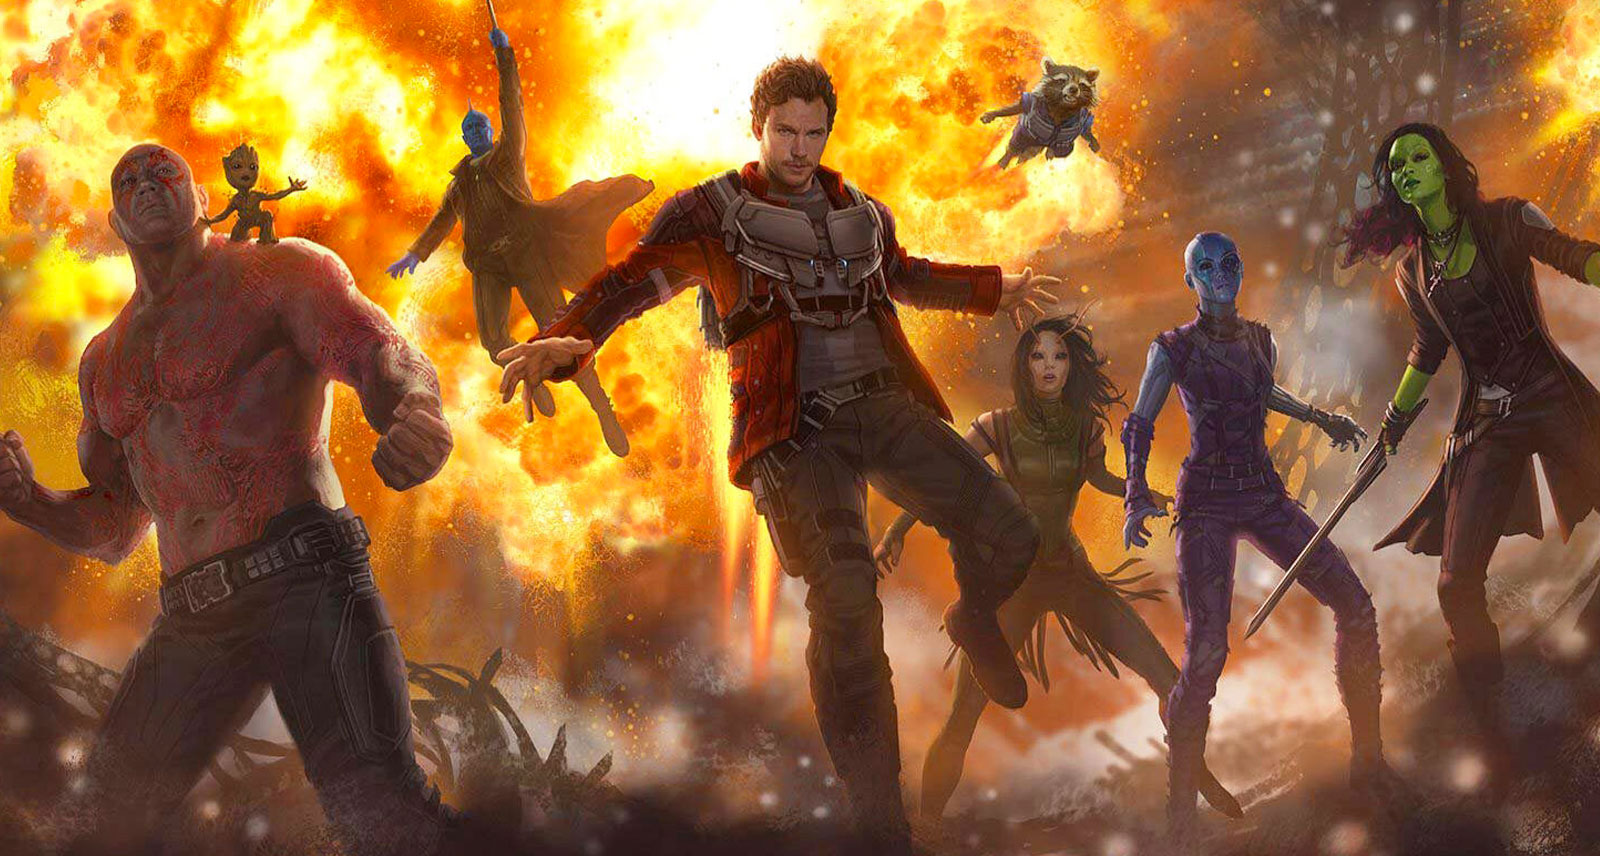 10 People You Can Expect To See at ‘Guardians of the Galaxy Vol. 2’ This Weekend